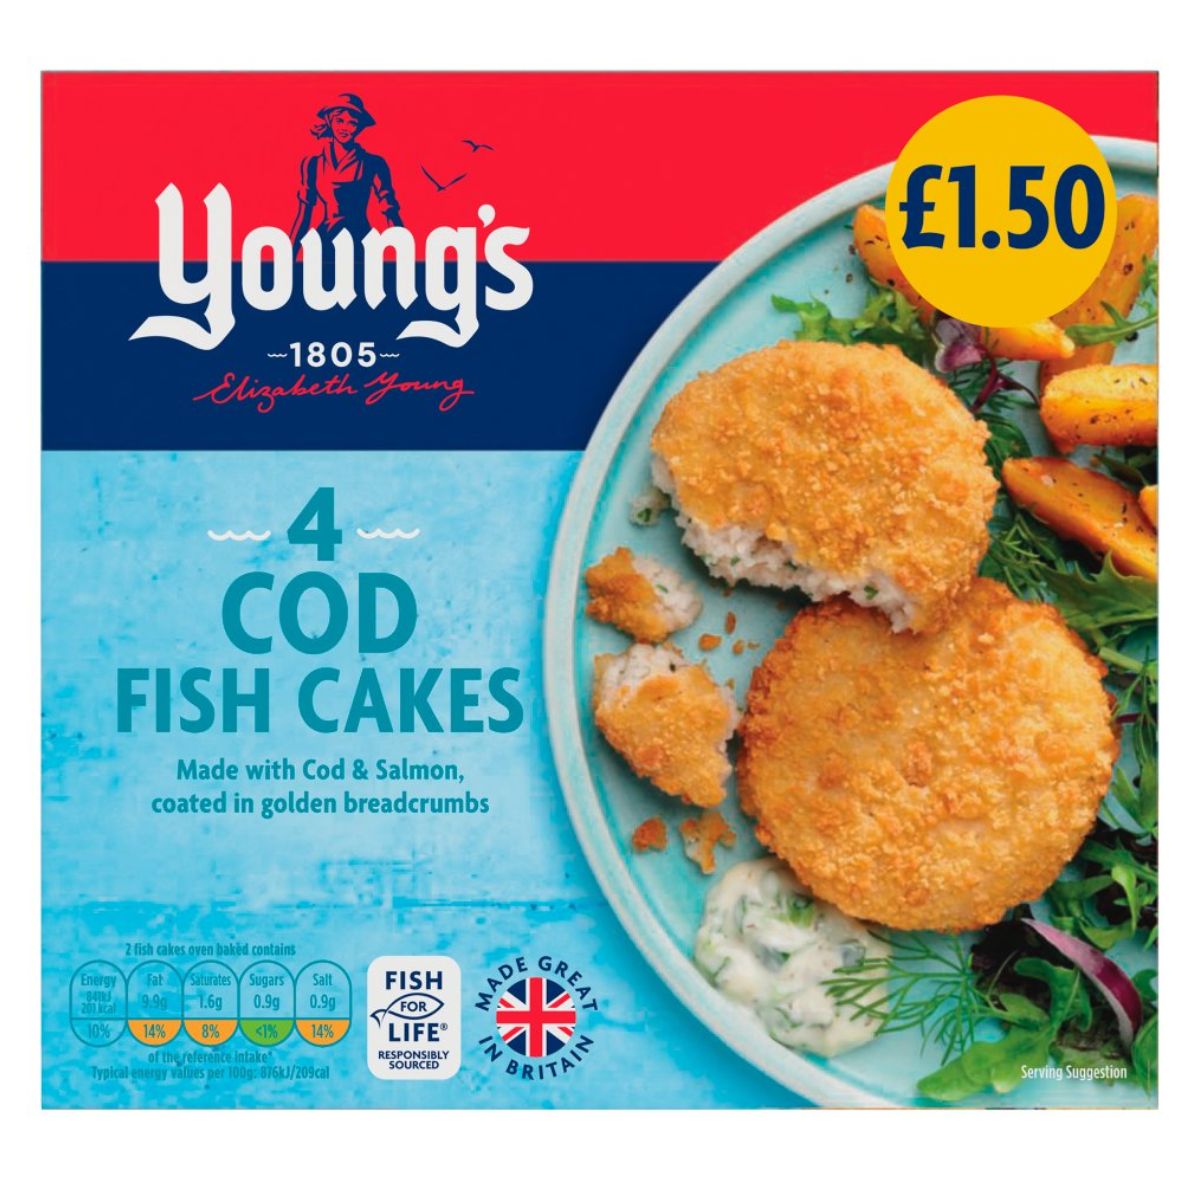 Package of Youngs - 4 Cod Fish Cakes - 200g with a price tag of £1.50, featuring an image of the product and potatoes on the side. text highlights ingredients and british heritage.